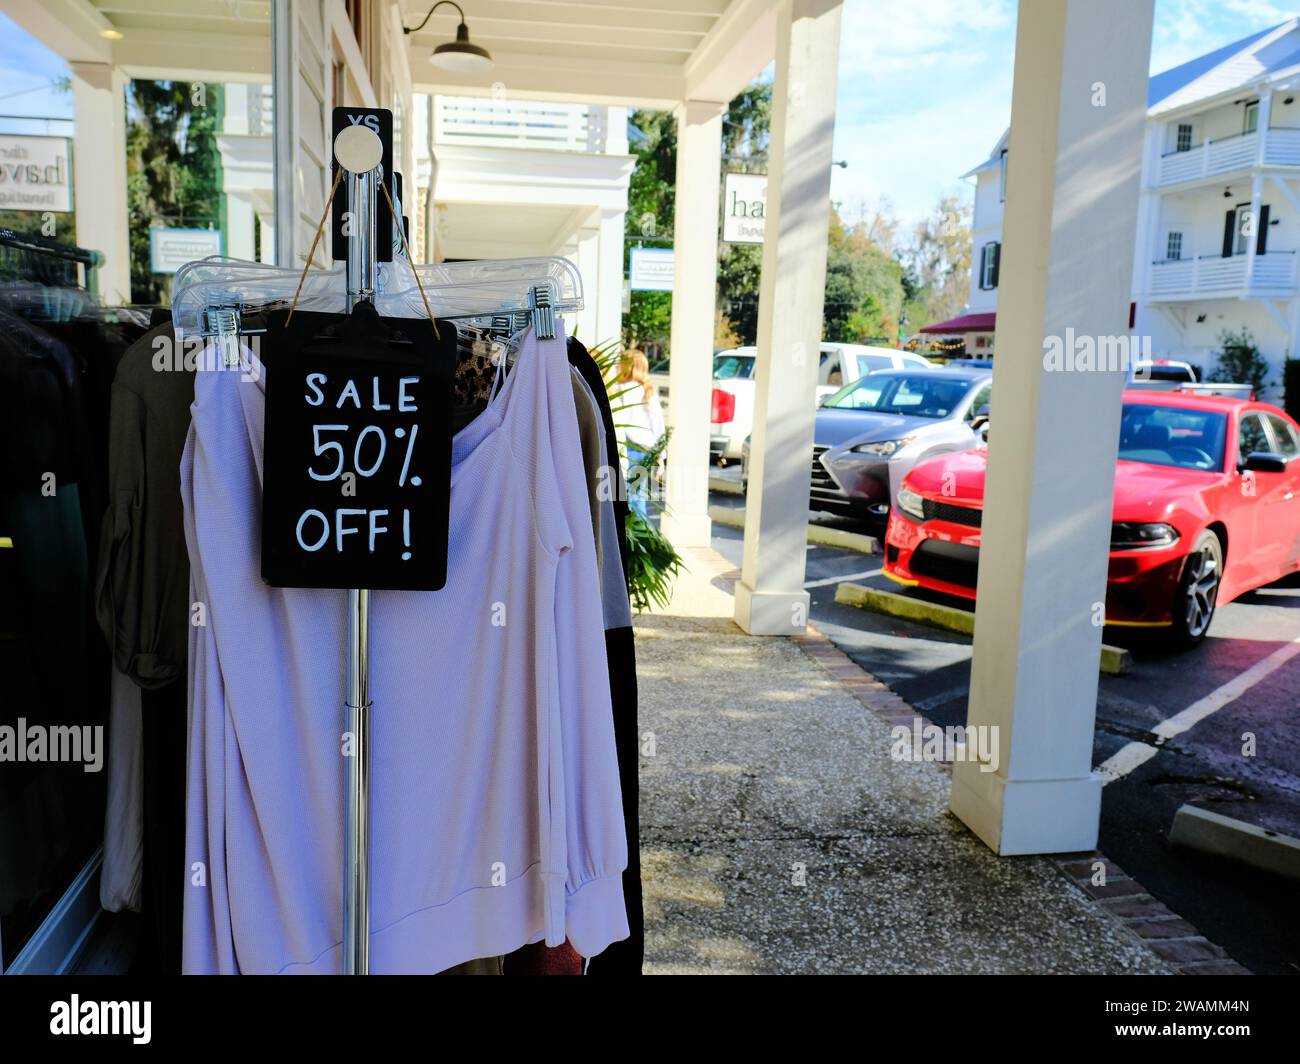 Rack with clothes outdoors on a sidewalk with a Sale 50% Off! sign noting markdown on original price and cost; priced to sell and move merchandise. Stock Photo